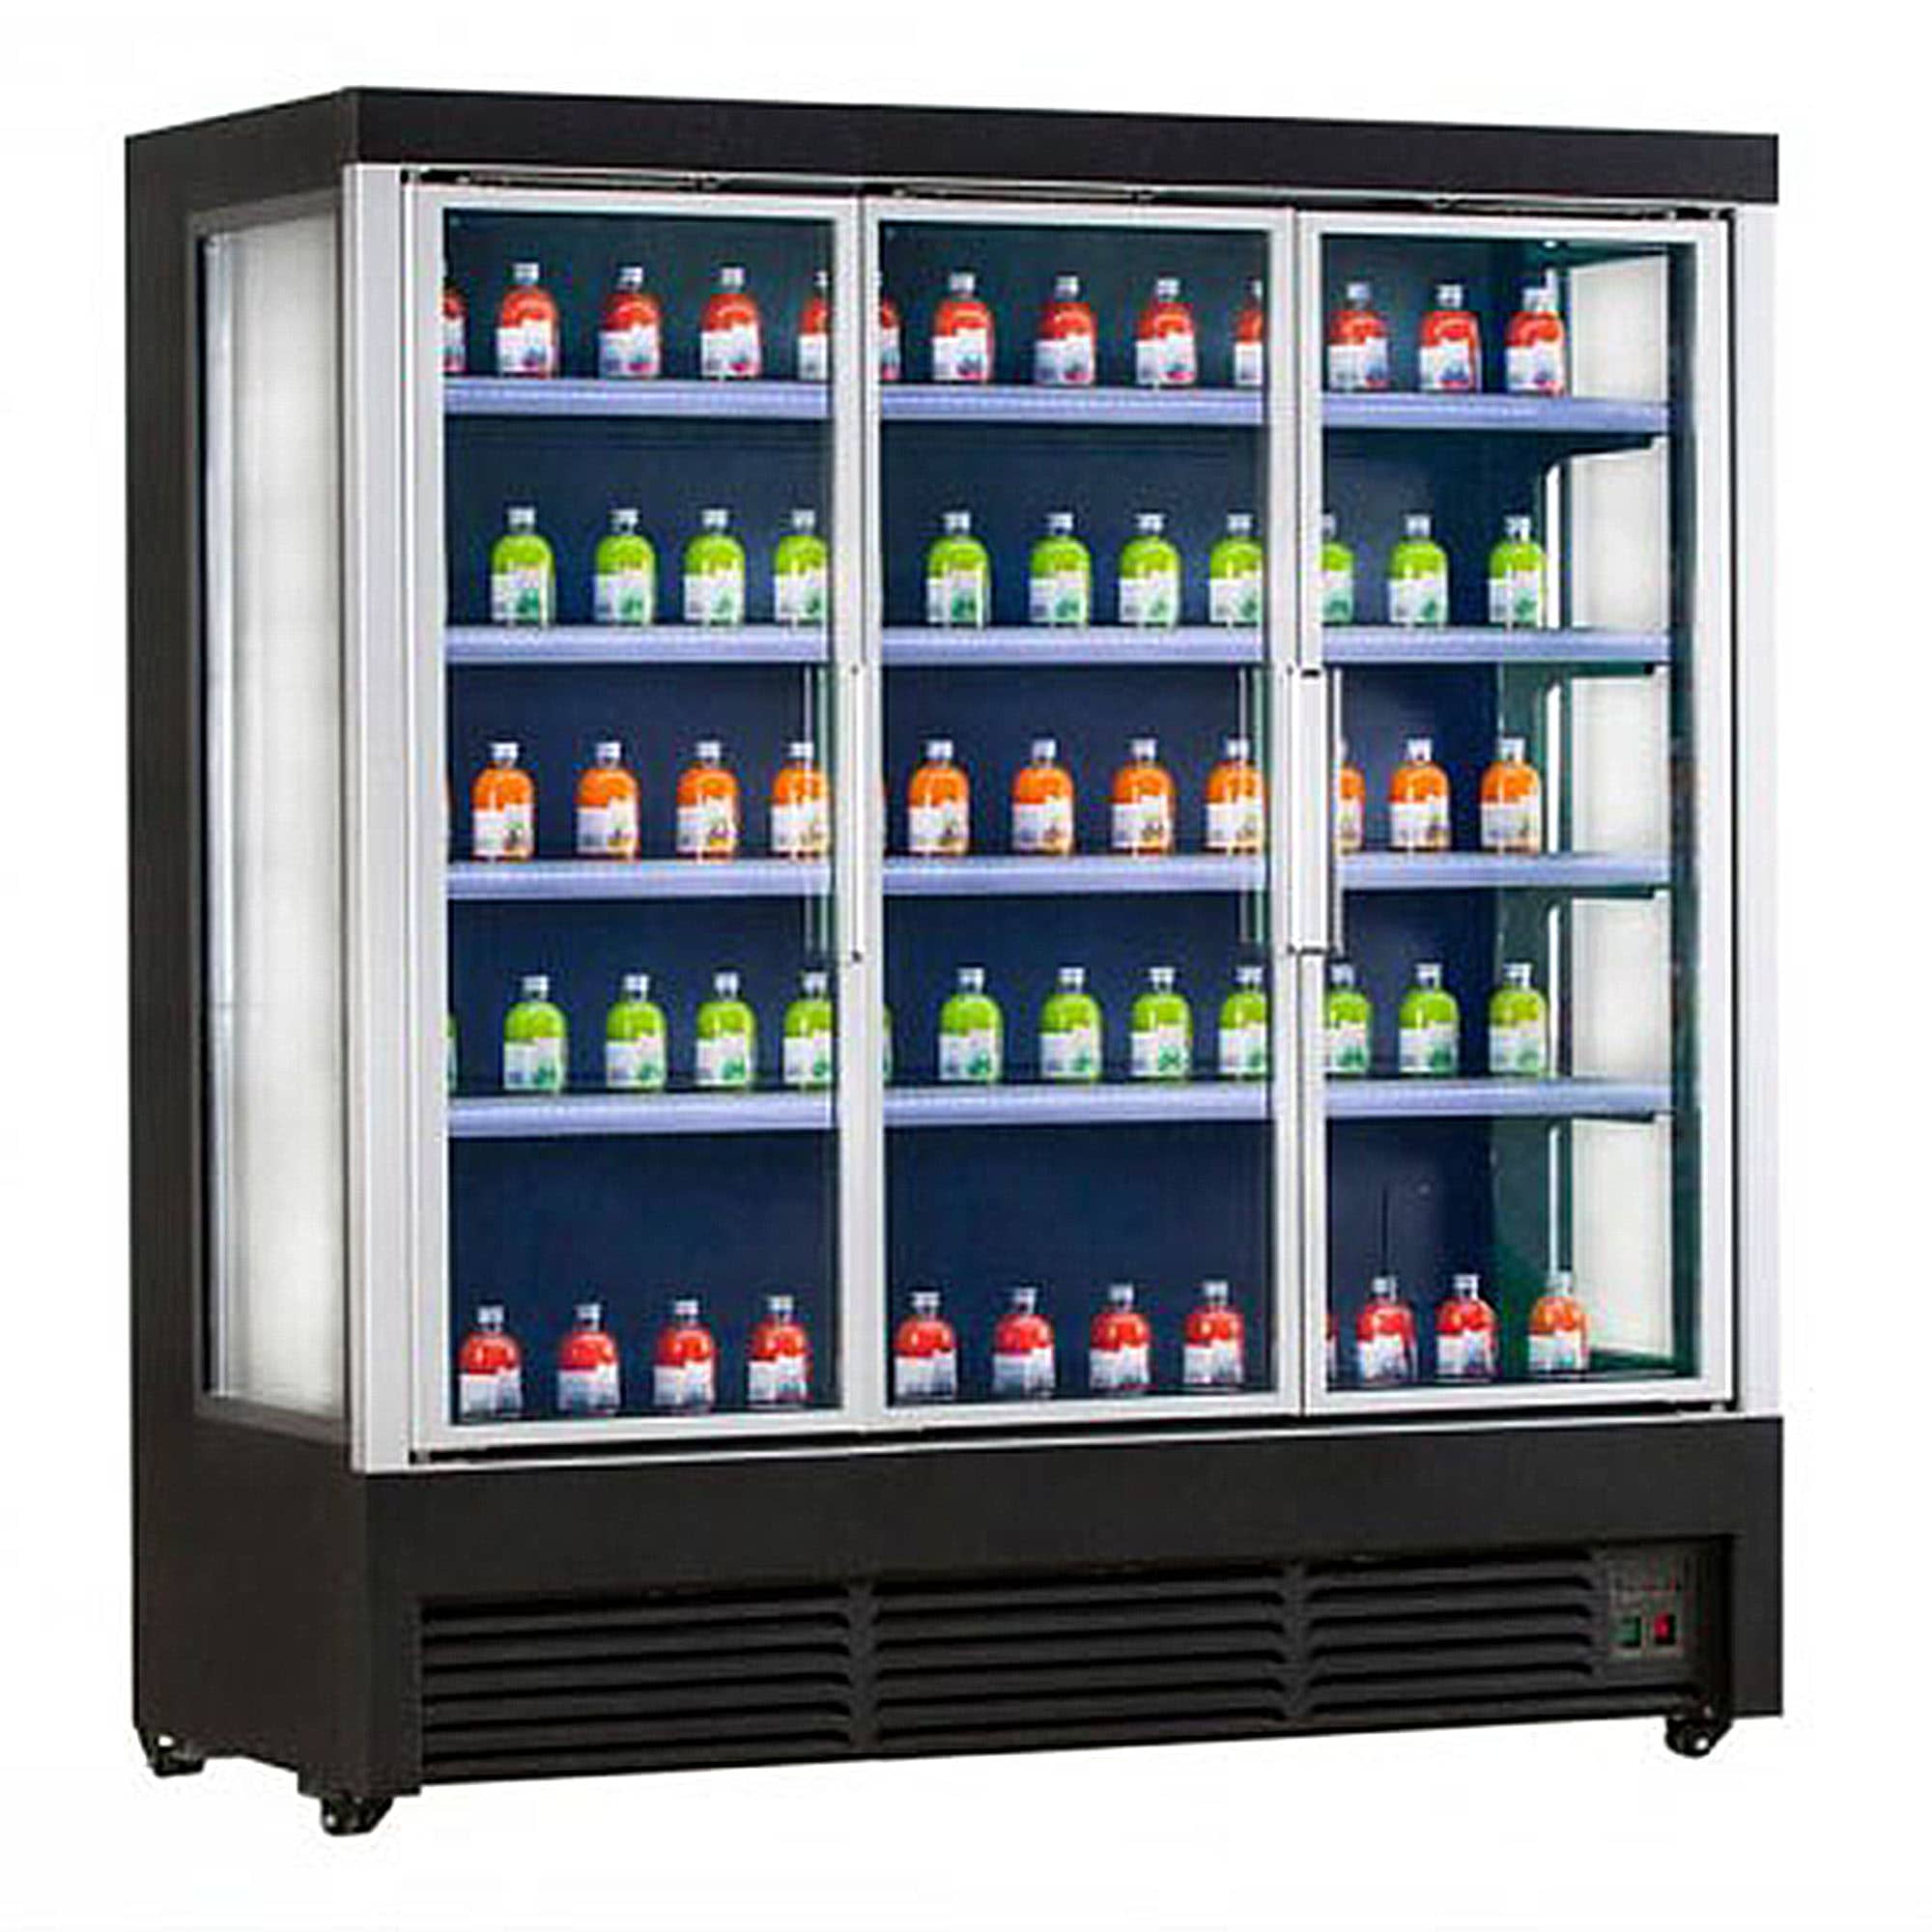 Wholesale Refrigerator Acrylic Storage and Fixtures for Retail Stores 